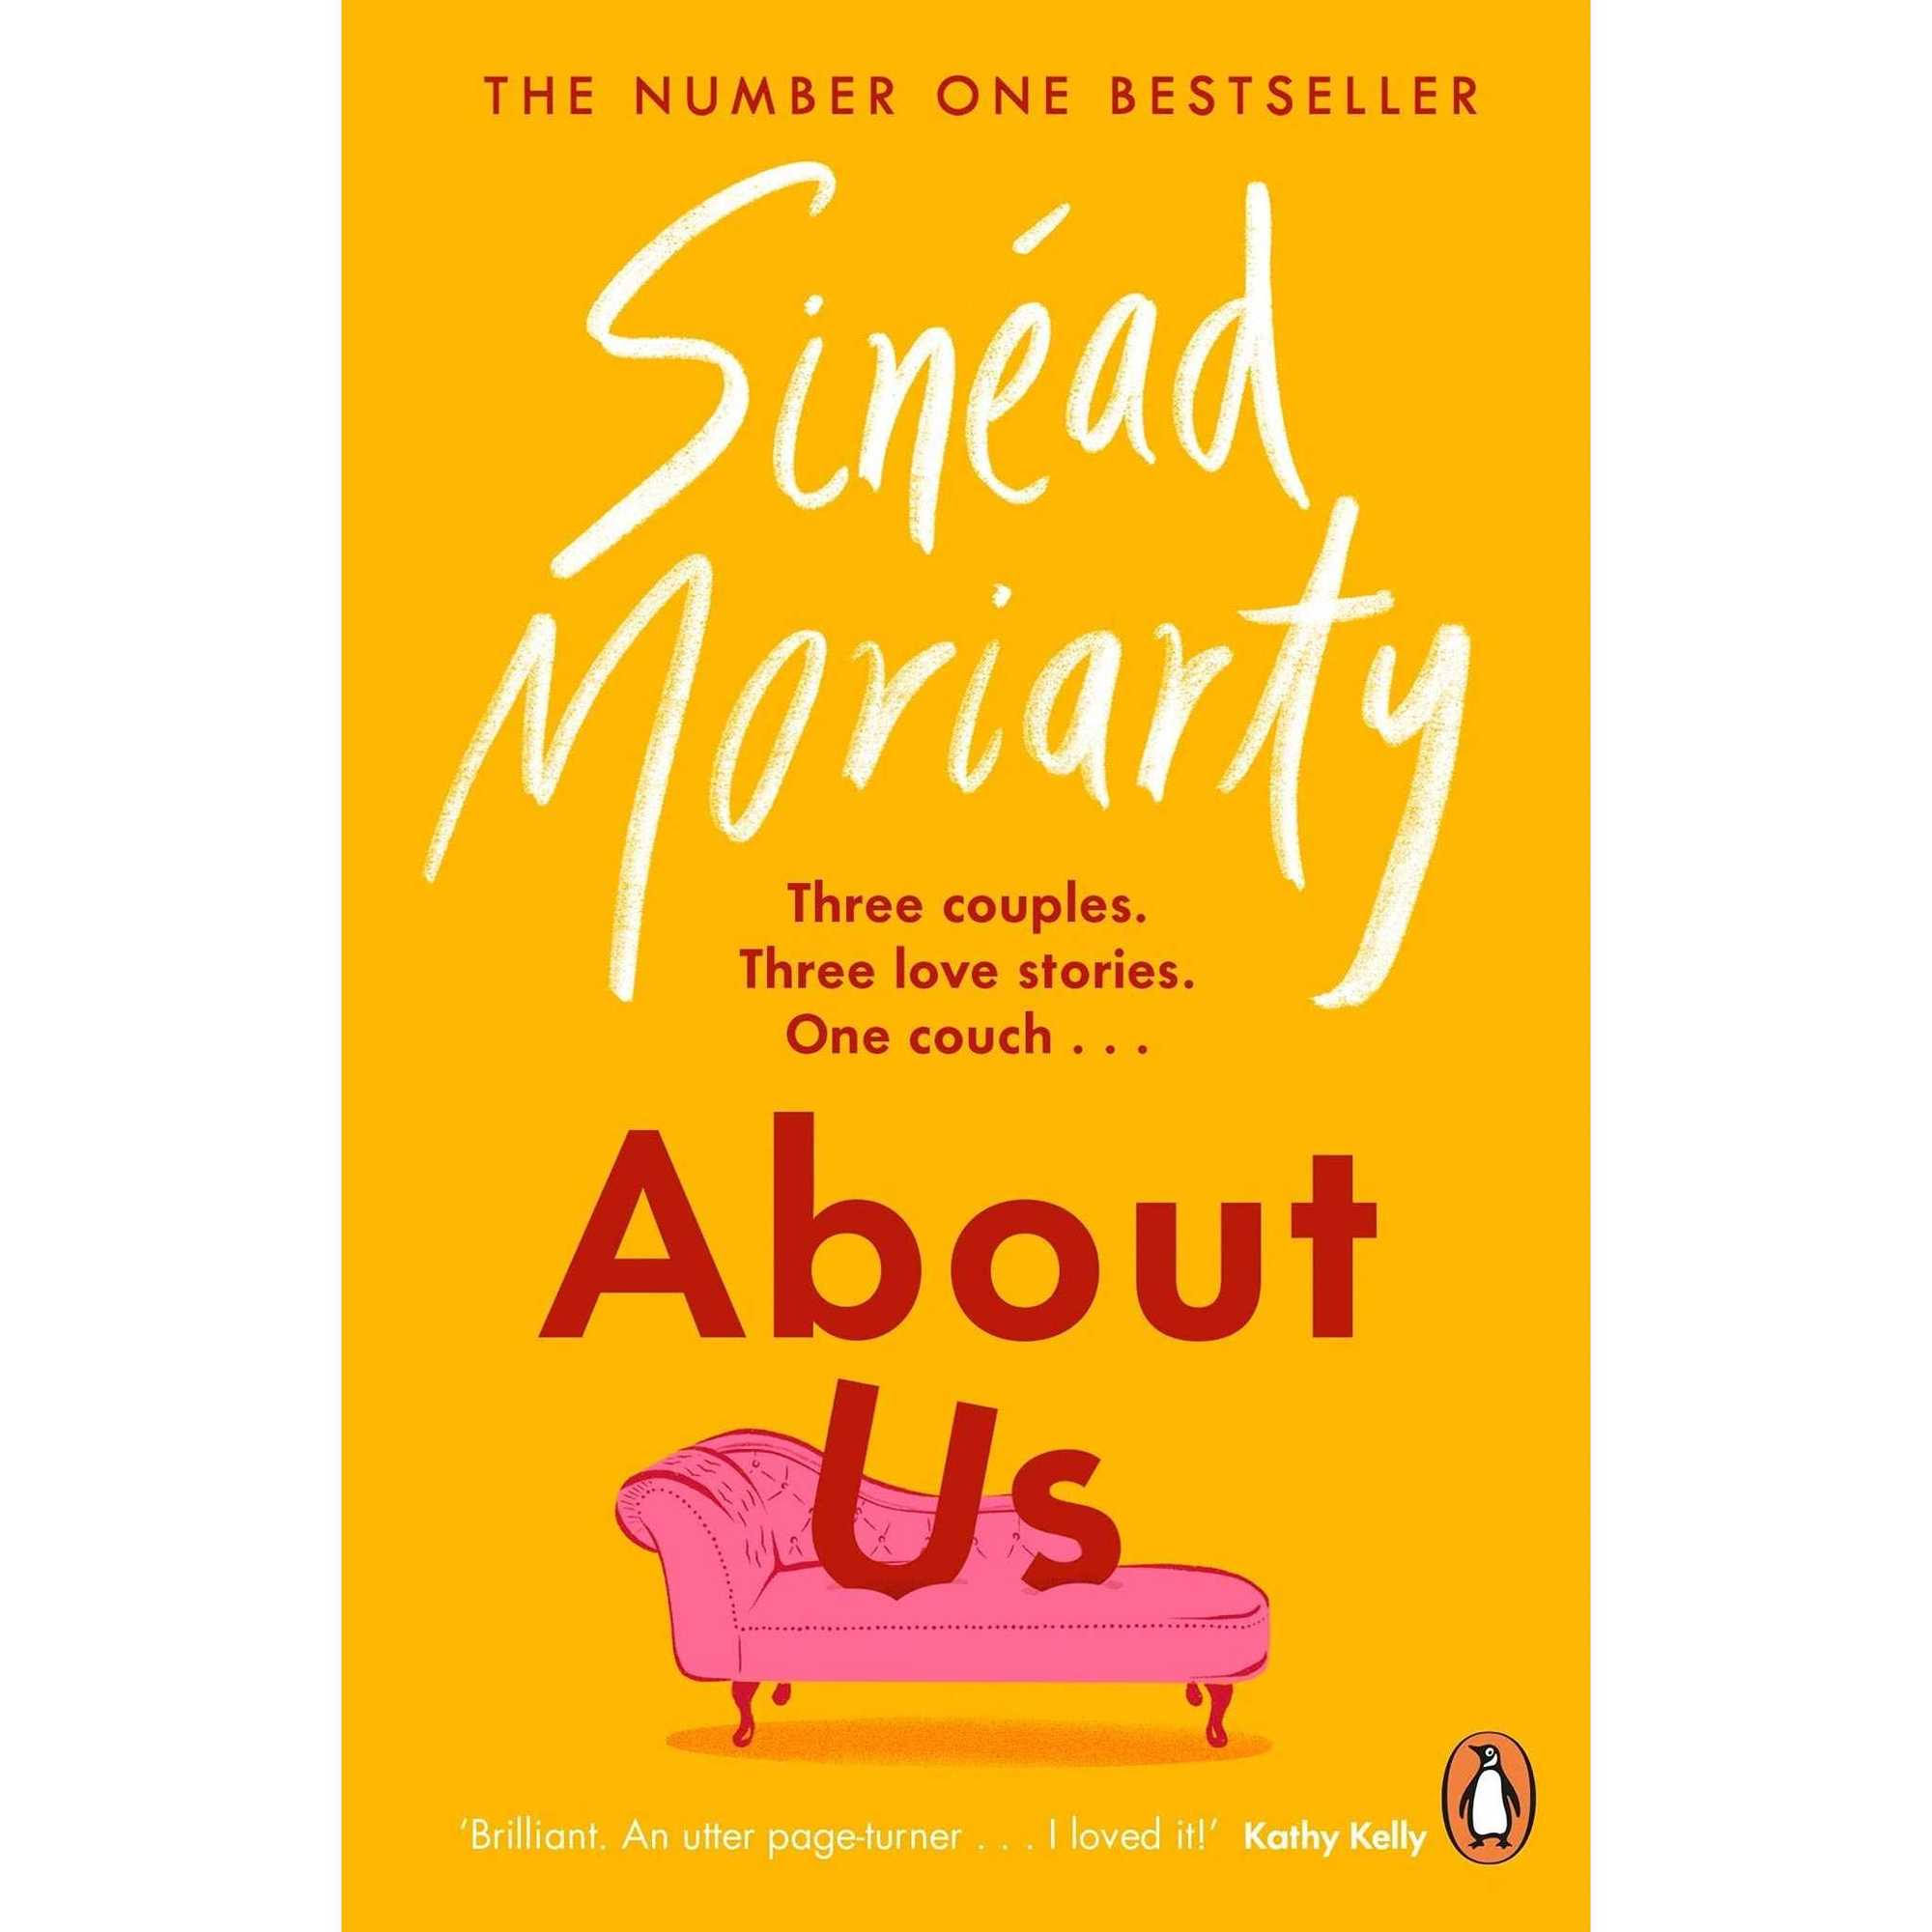 about US by Sinead Moriarty